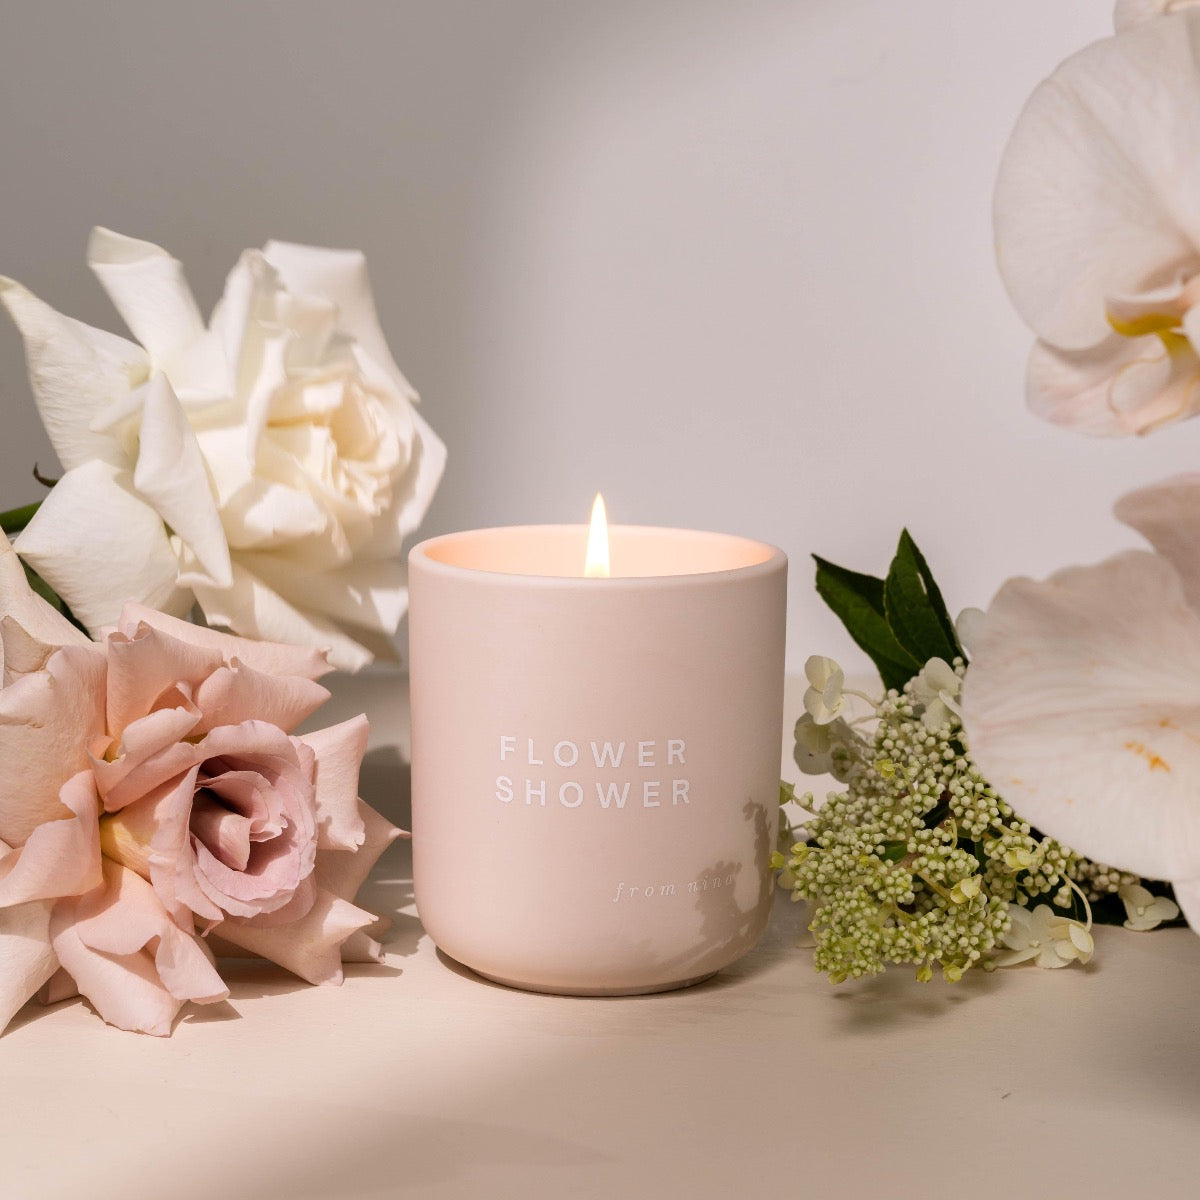 From Nina-Flower Shower Perfumed Candle 310g